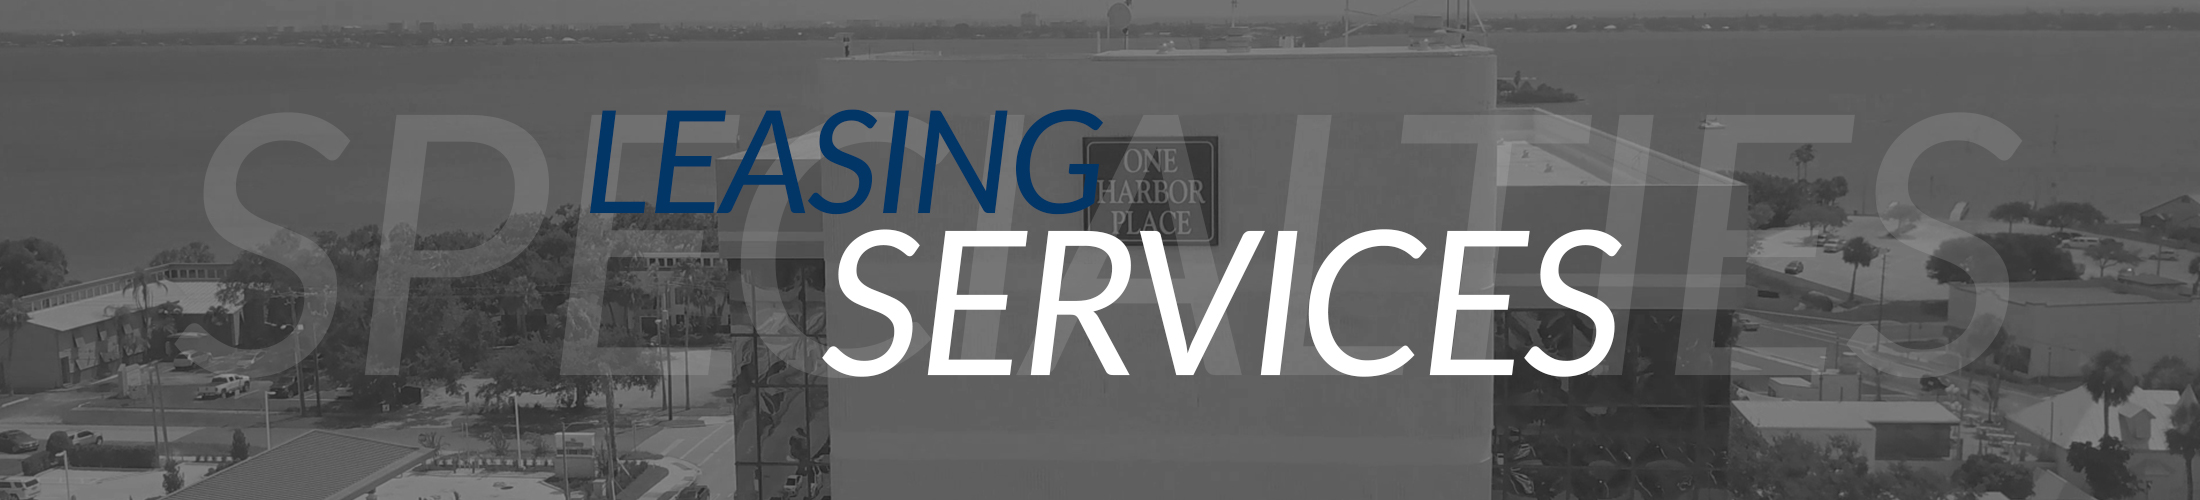 LEASING SERVICES Banner